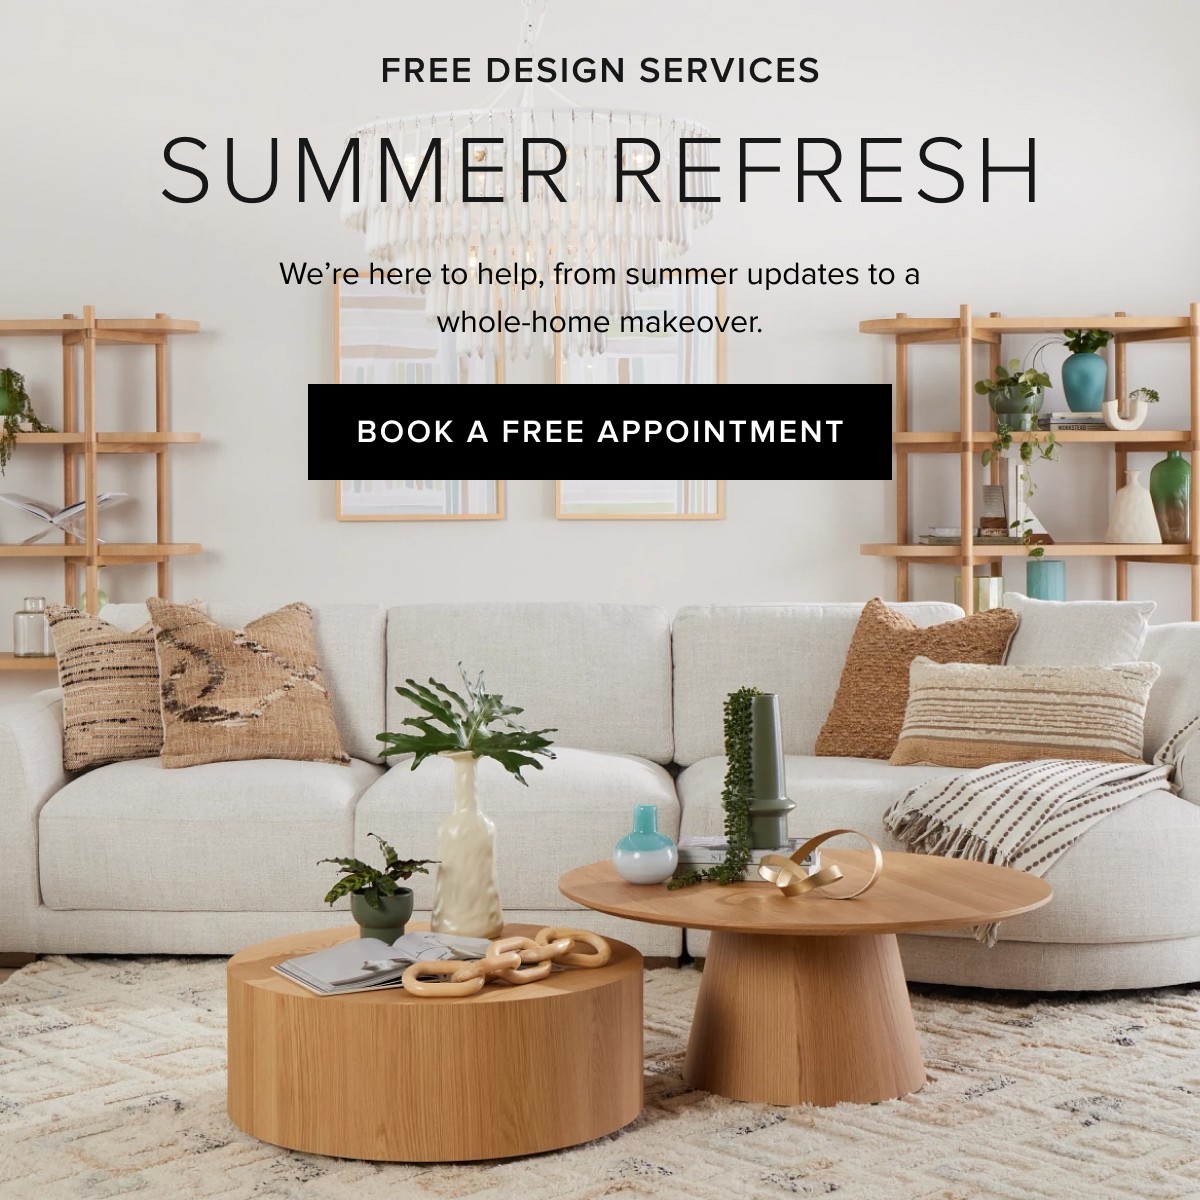 free design services summer refresh. book a free appointment